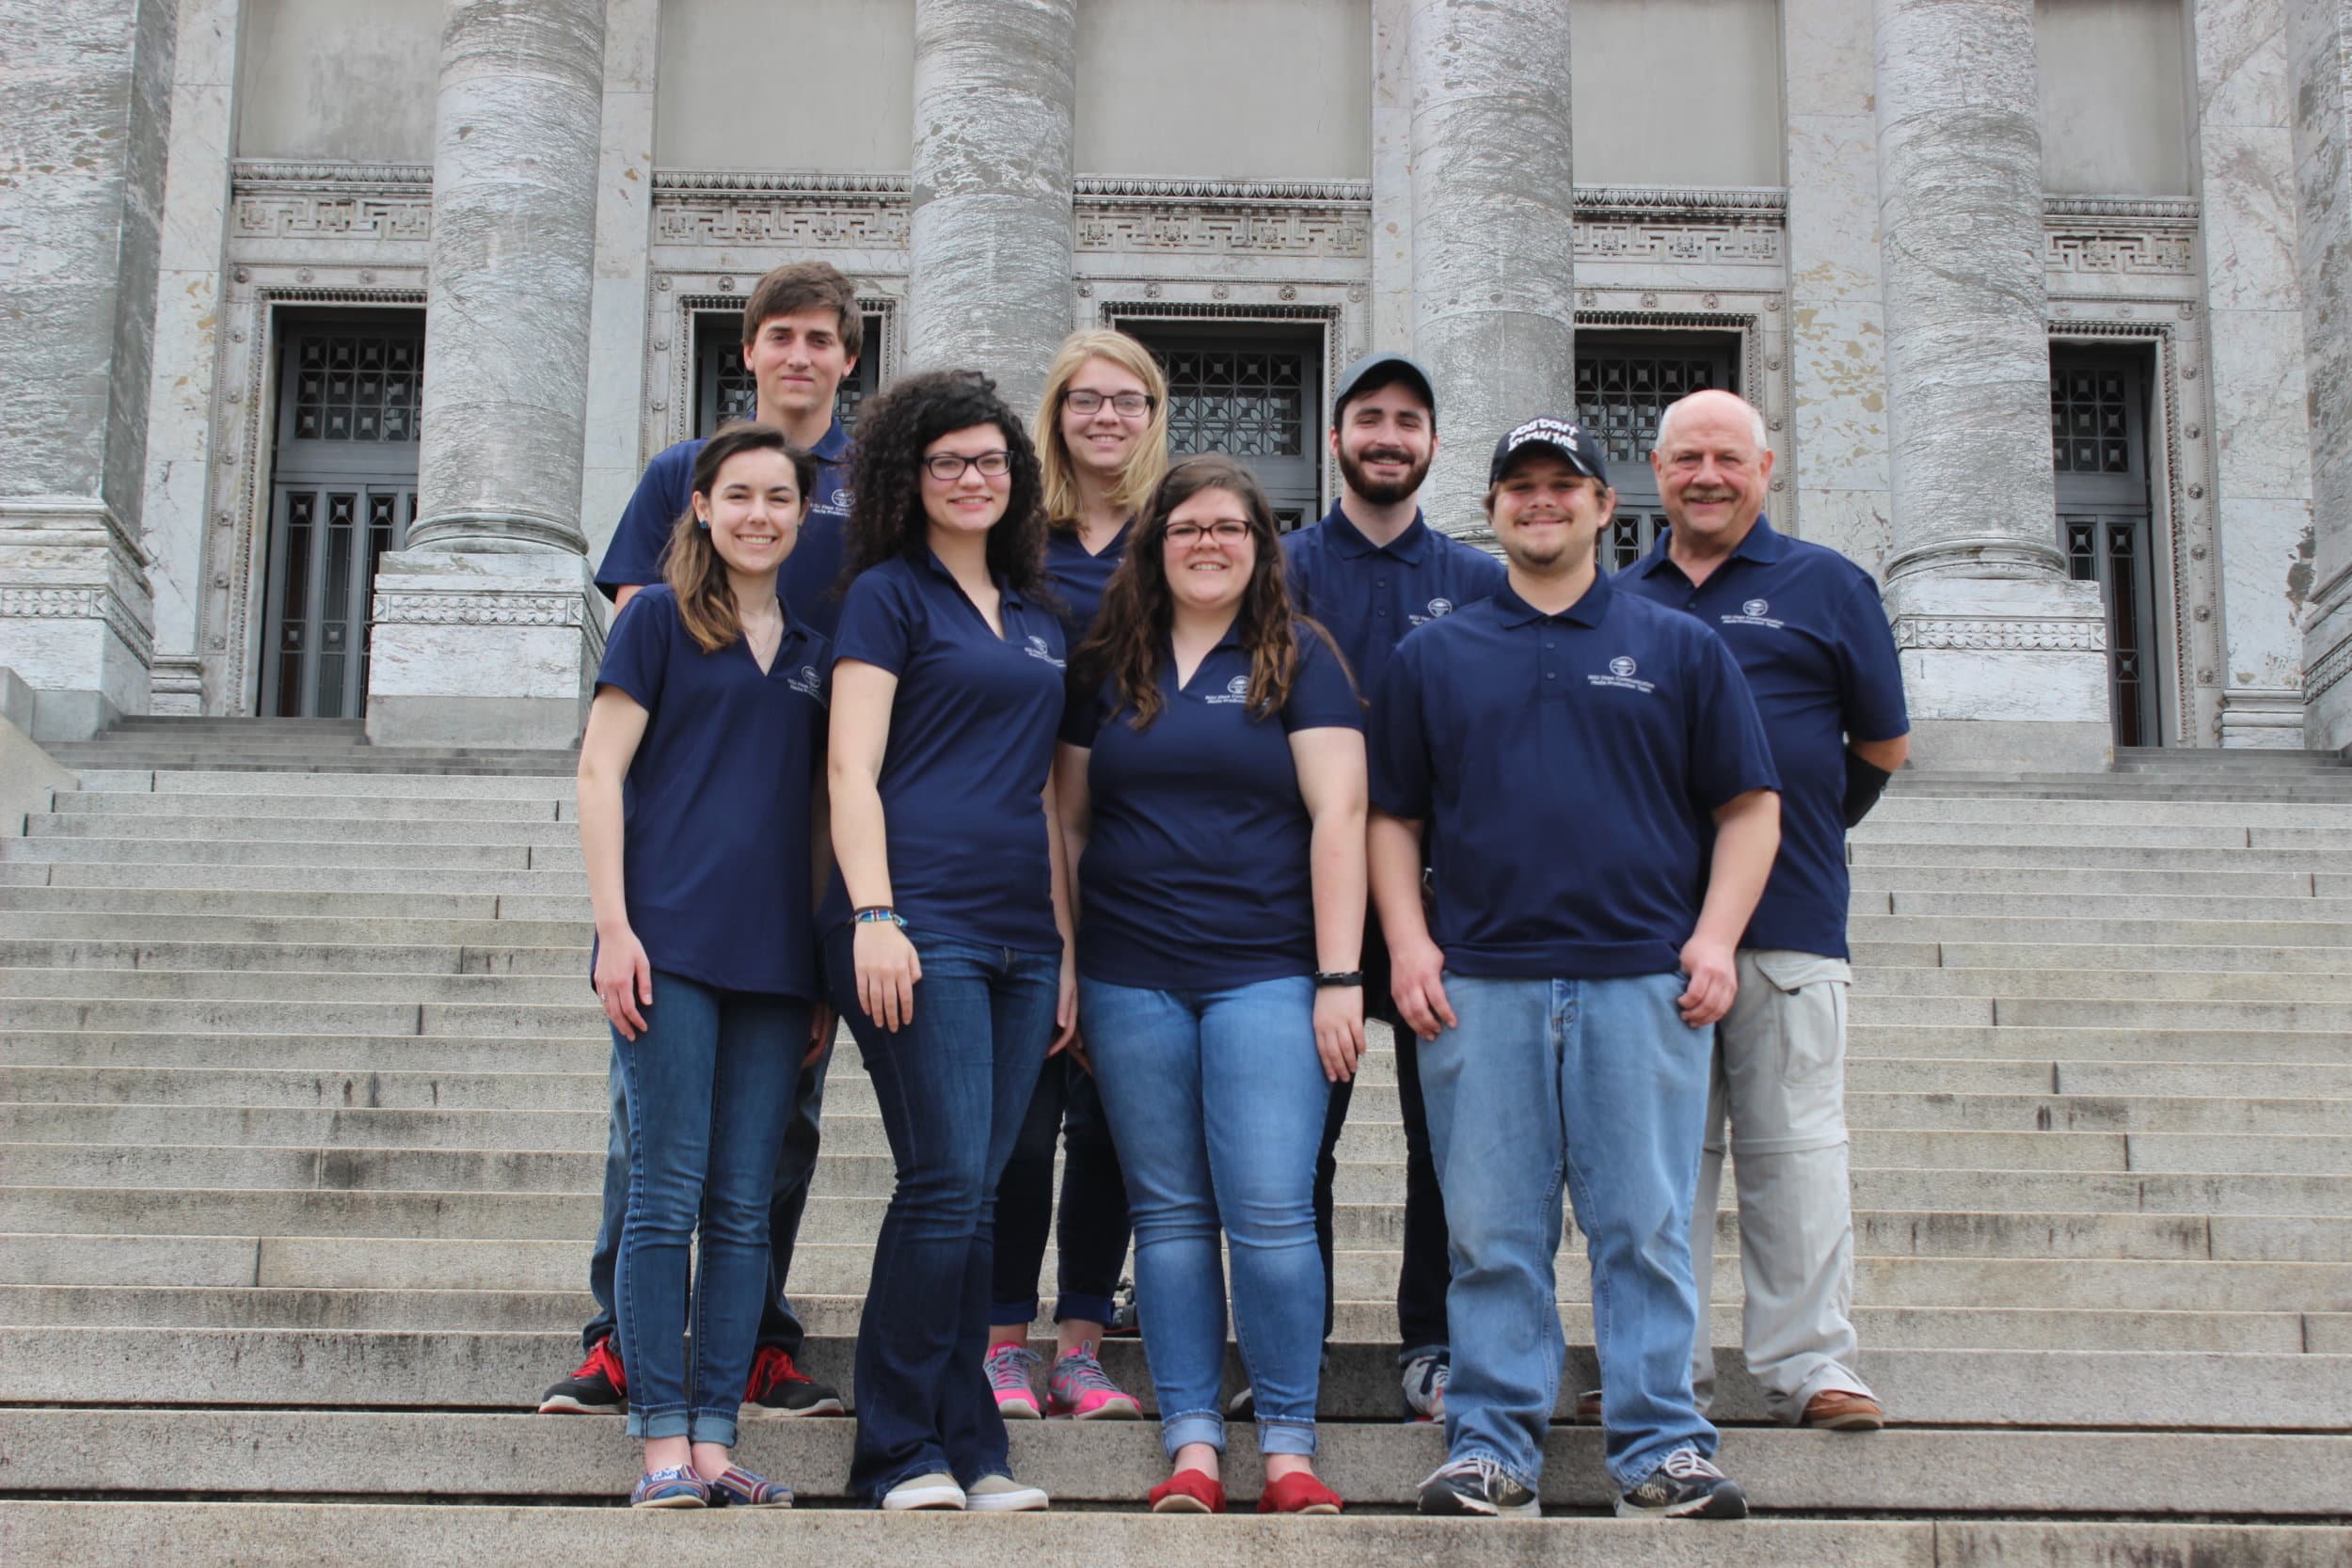 Photo Courtesy: Alyssa AsheIn photo: Katie Galyean, Bryan Langston, Ashley Howell, Alyssa Ashe, Amy Hubbard, Kyle Packard, Jacob Sanders and Andy Stevens stand on the steps of a Parliament in the capital of Uruguay over spring break.